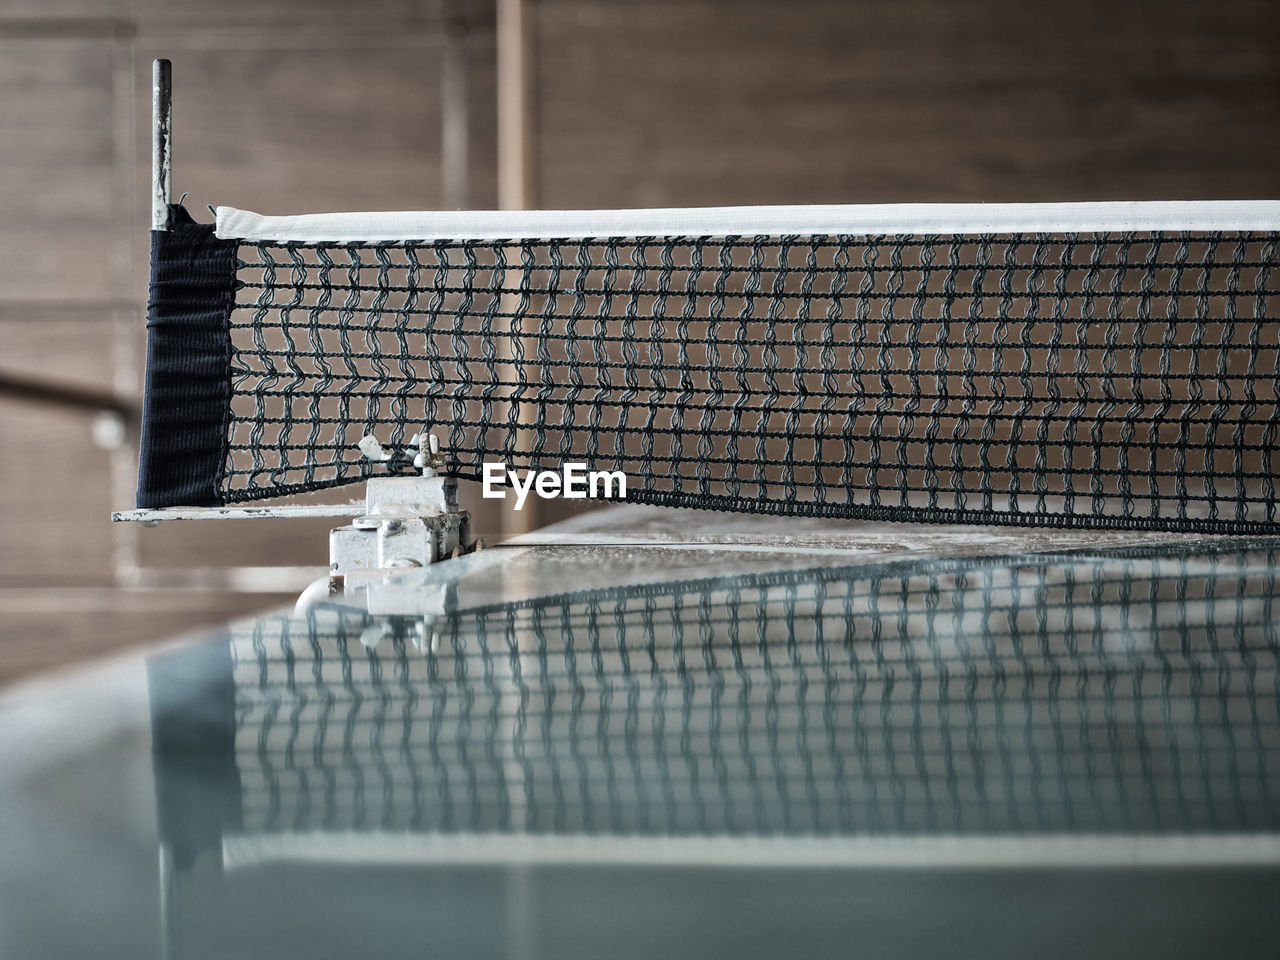 Surface level of table tennis net